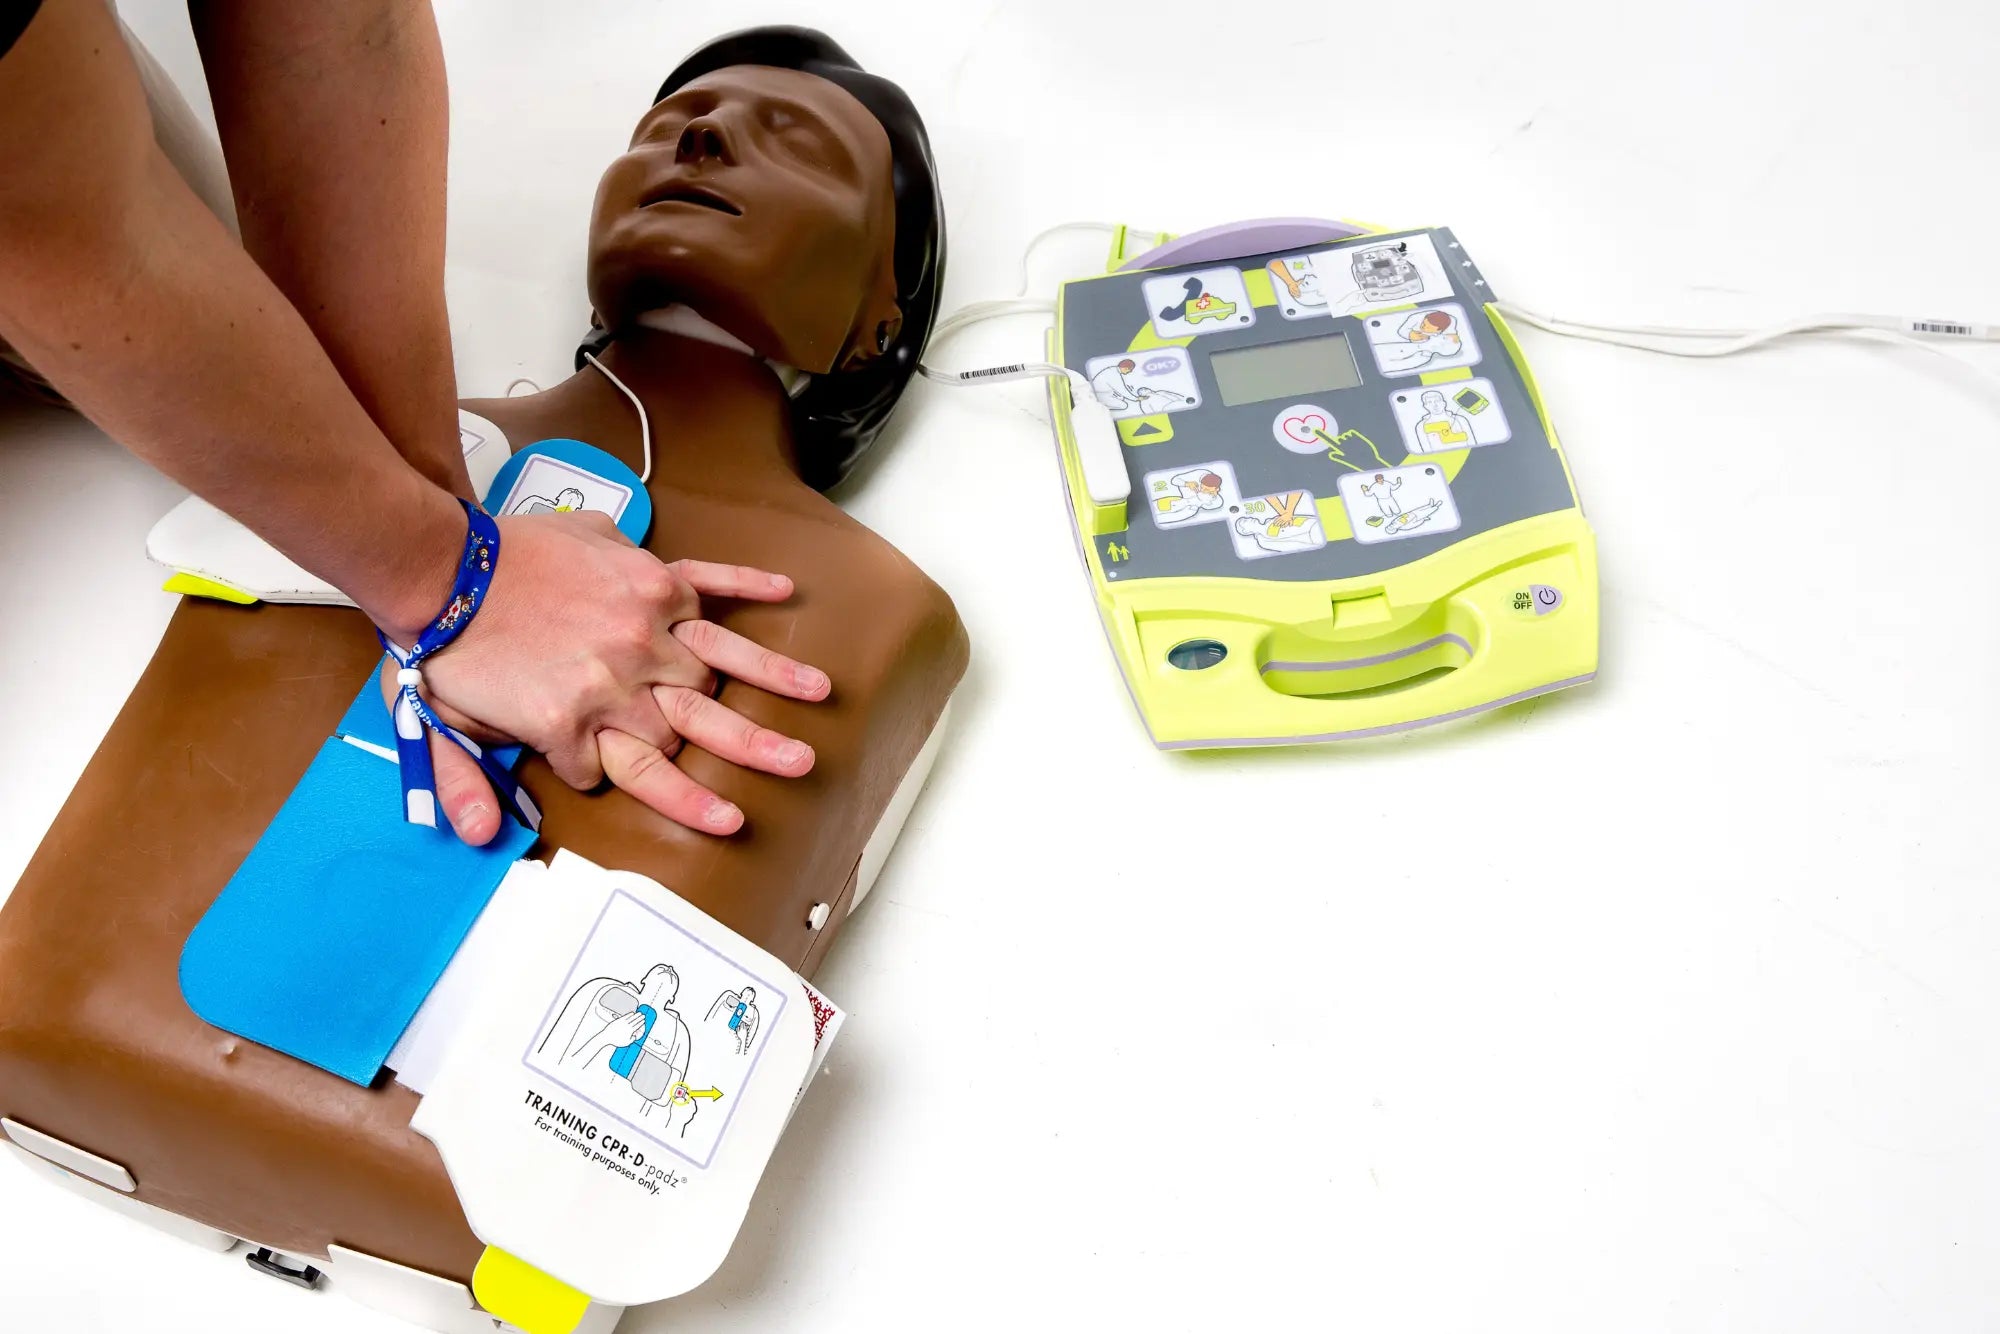 A first responder administering CPR on a CPR dummy that is hooked up to an AED.